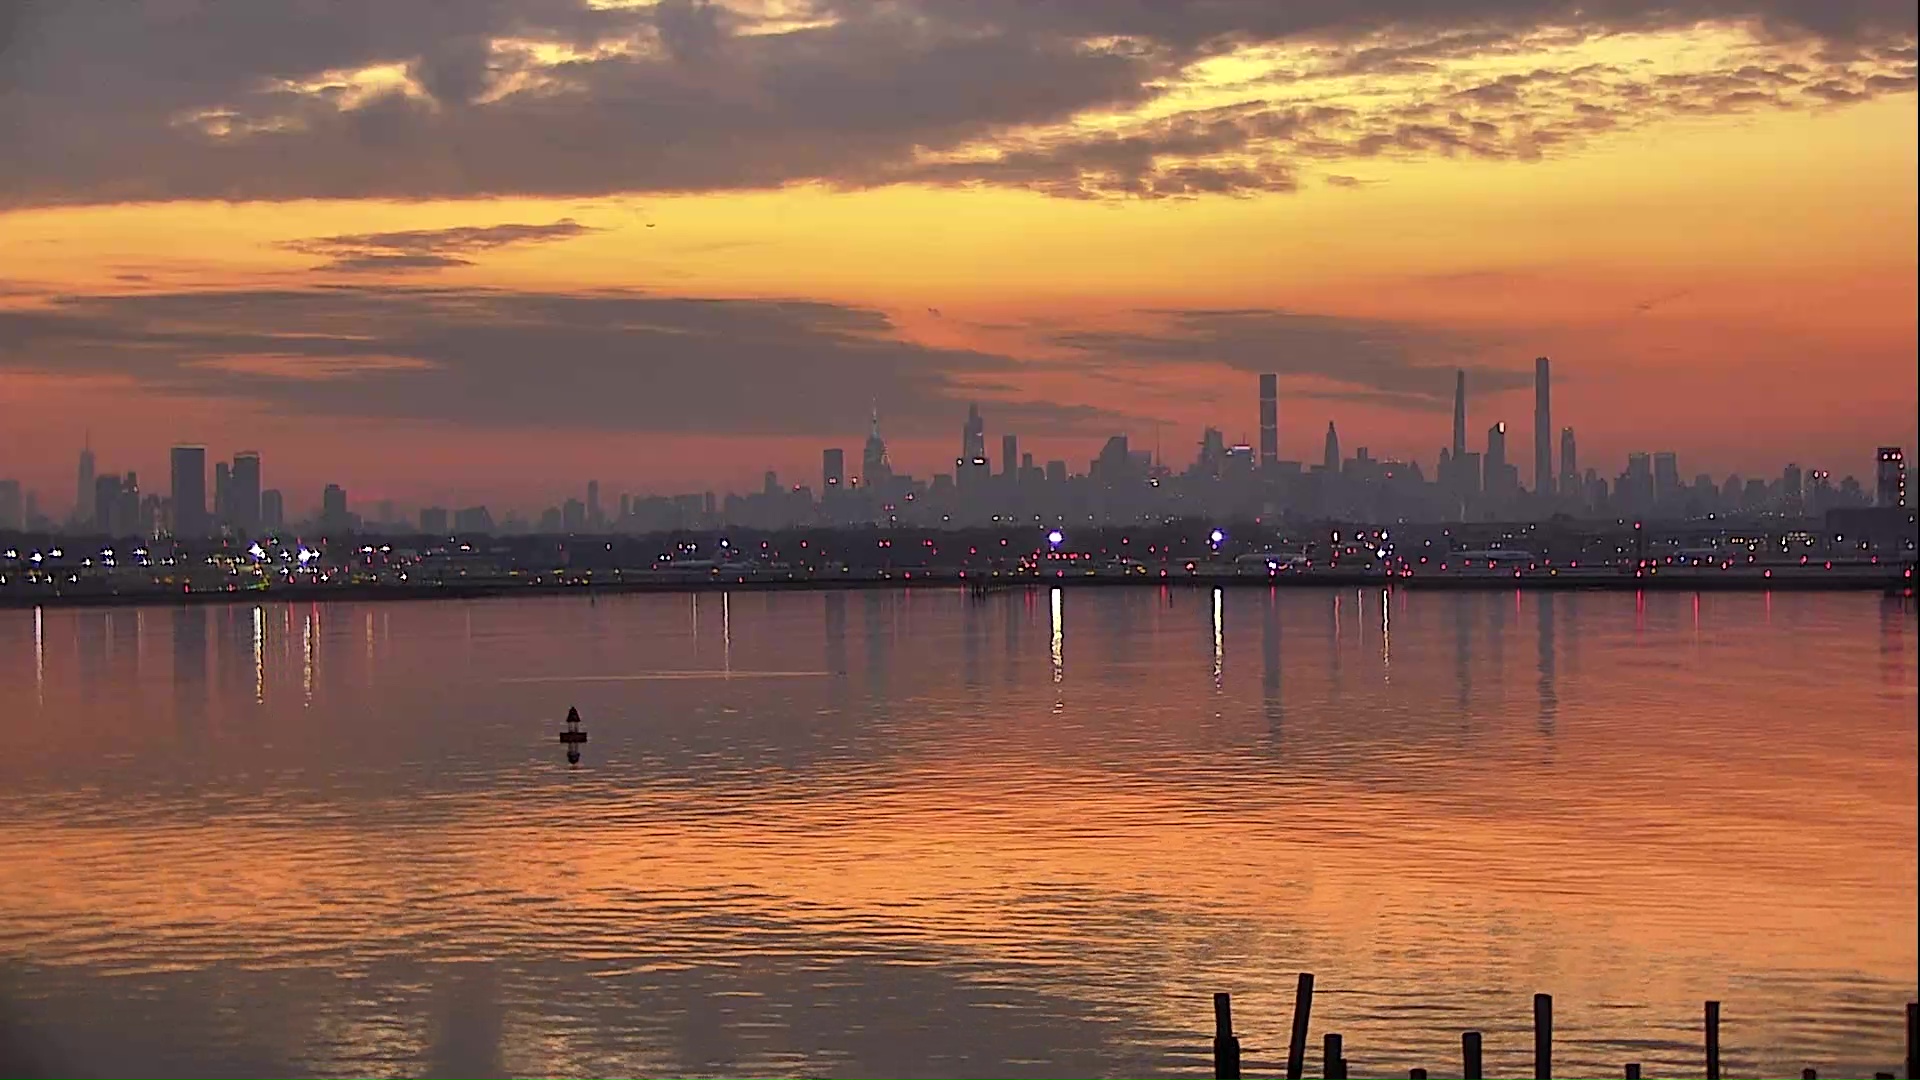 Airport Webcams on Twitter: "A nice New York City 'desktop wallpaper'  sunset right now, courtesy of the La Guardia Airport webcam:  https://t.co/2SEM1lZSBX https://t.co/OxO8vDP63w" / Twitter